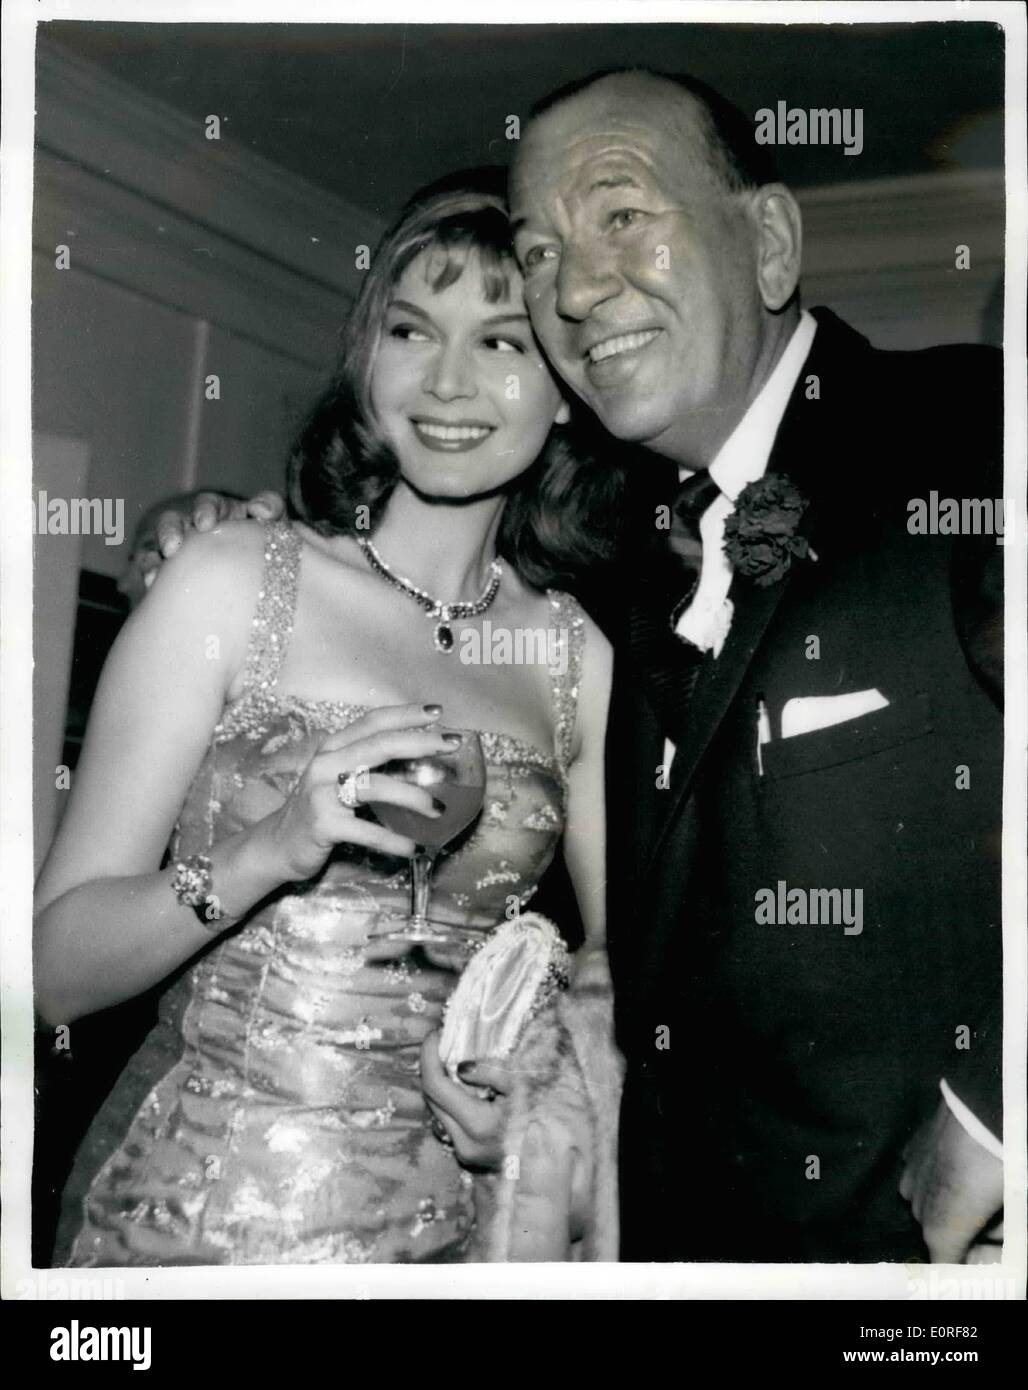 Jun. 06, 1959 - Cocktail Party For Stars Of Charity Matinee. Noel Coward With Eva Bartok: A cocktail party was held in Bloomsbury last night as a get-together in readiness for the Night of 100 Stars - Charity Matinee - organized by Noel Coward. Photo shows Noel Coward with Eva Bartok at the party last night. Stock Photo